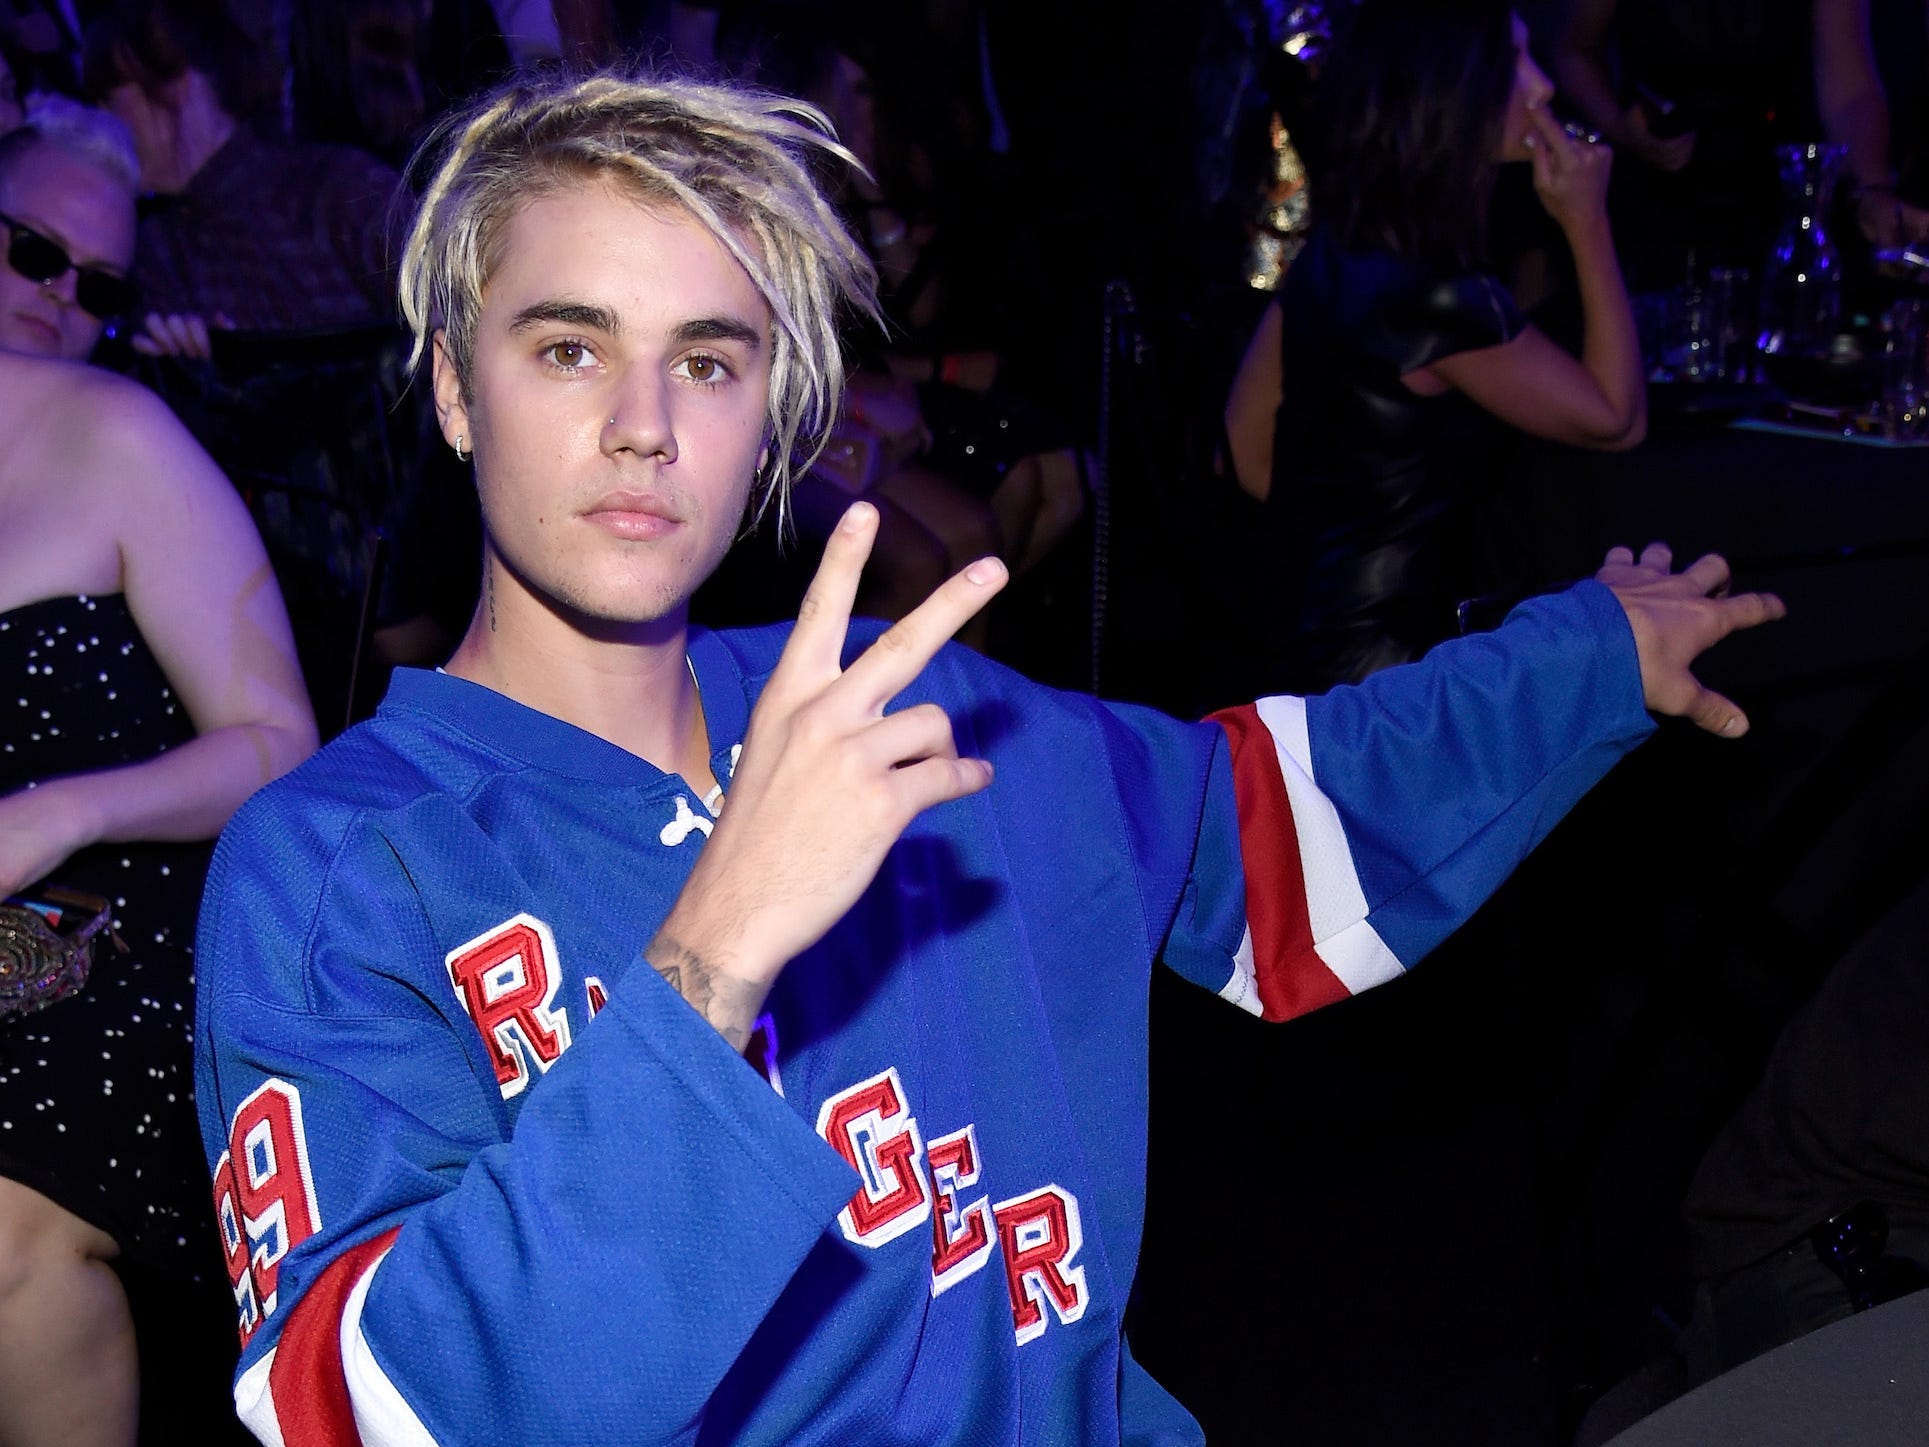 Justin Bieber is being accused of cultural appropriation (again) after he  debuted a new hairstyle resembling dreadlocks